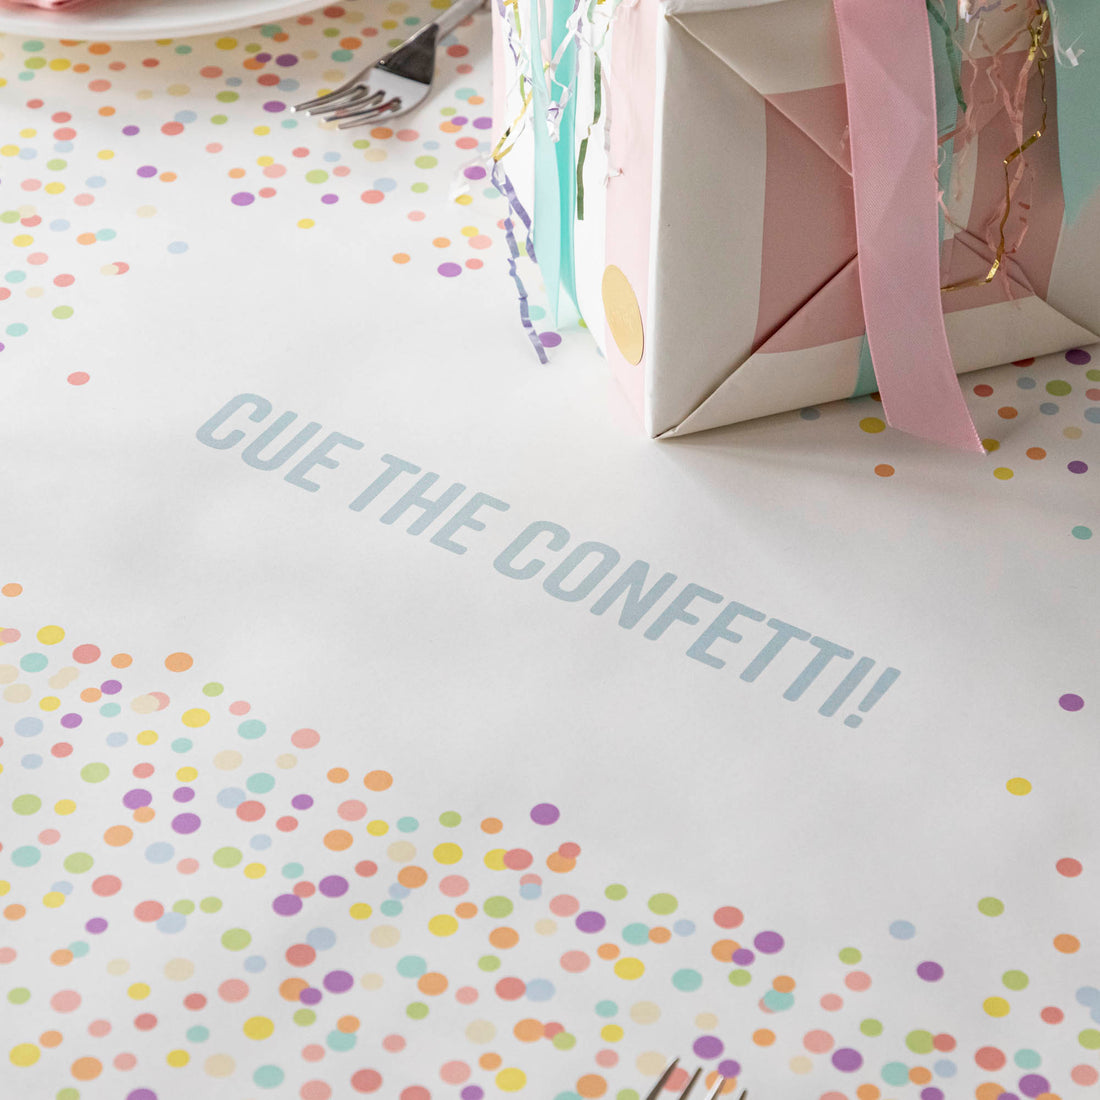 Close-up of the Confetti Sprinkles Personalized Runner under a birthday table setting, with &quot;CUE THE CONFETTI!&quot; printed in blue.